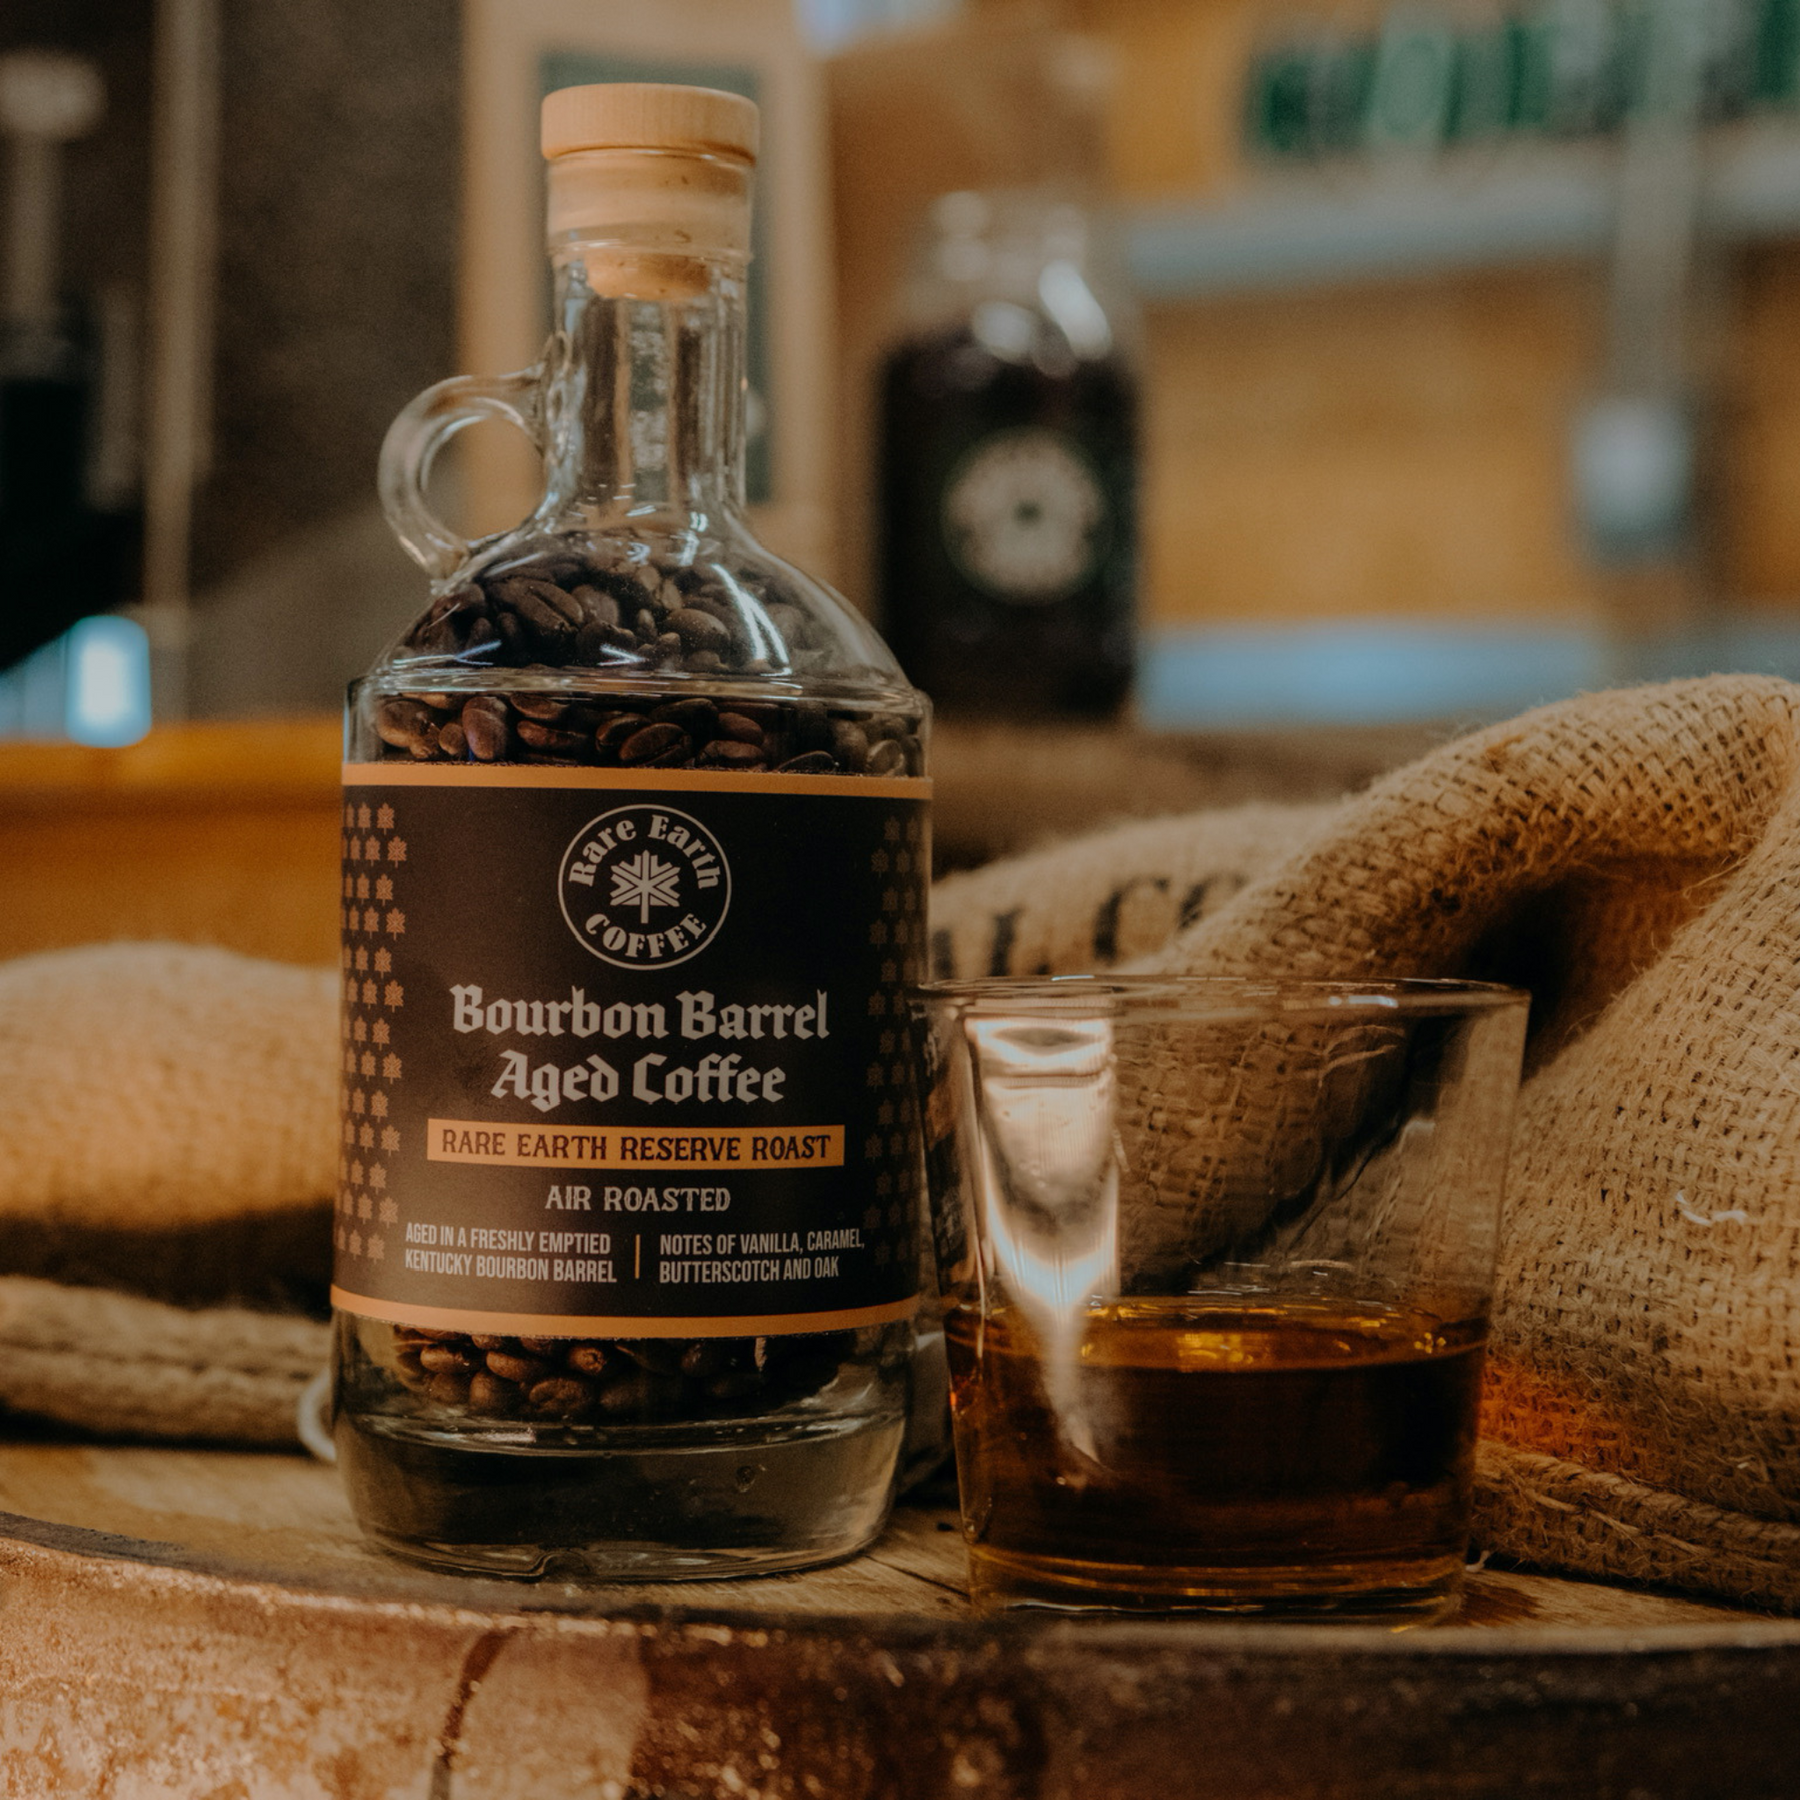 Experience the Rich and Complex Flavors of Rare Earth Coffee's Bourbon Barrel Aged Coffee